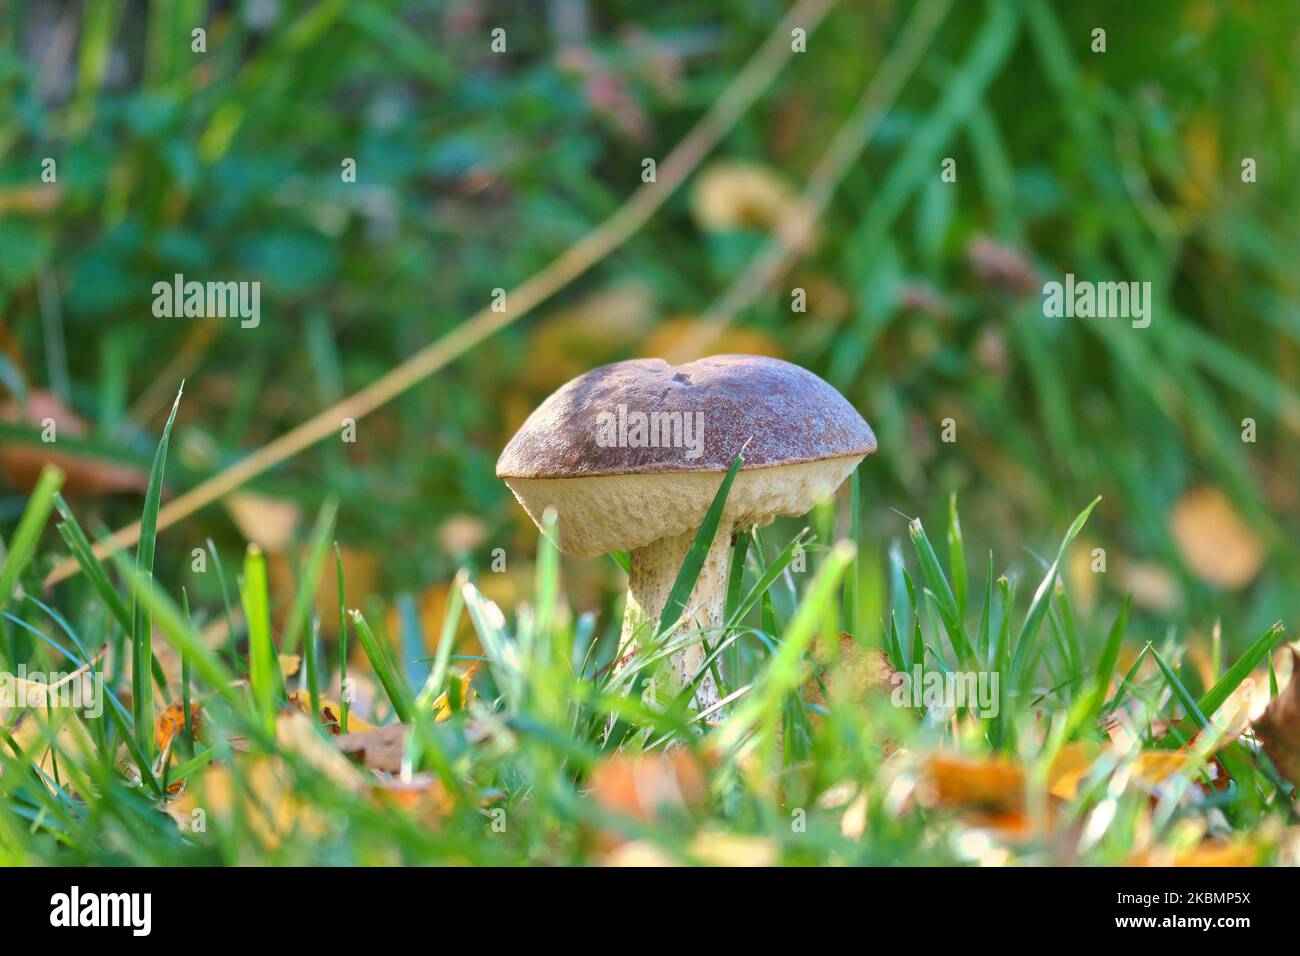 Chestnut, brown cap. Mushroom on the forest floor with moss and pine needles. Edible mushroom collected in the forest. Photo from nature Stock Photo